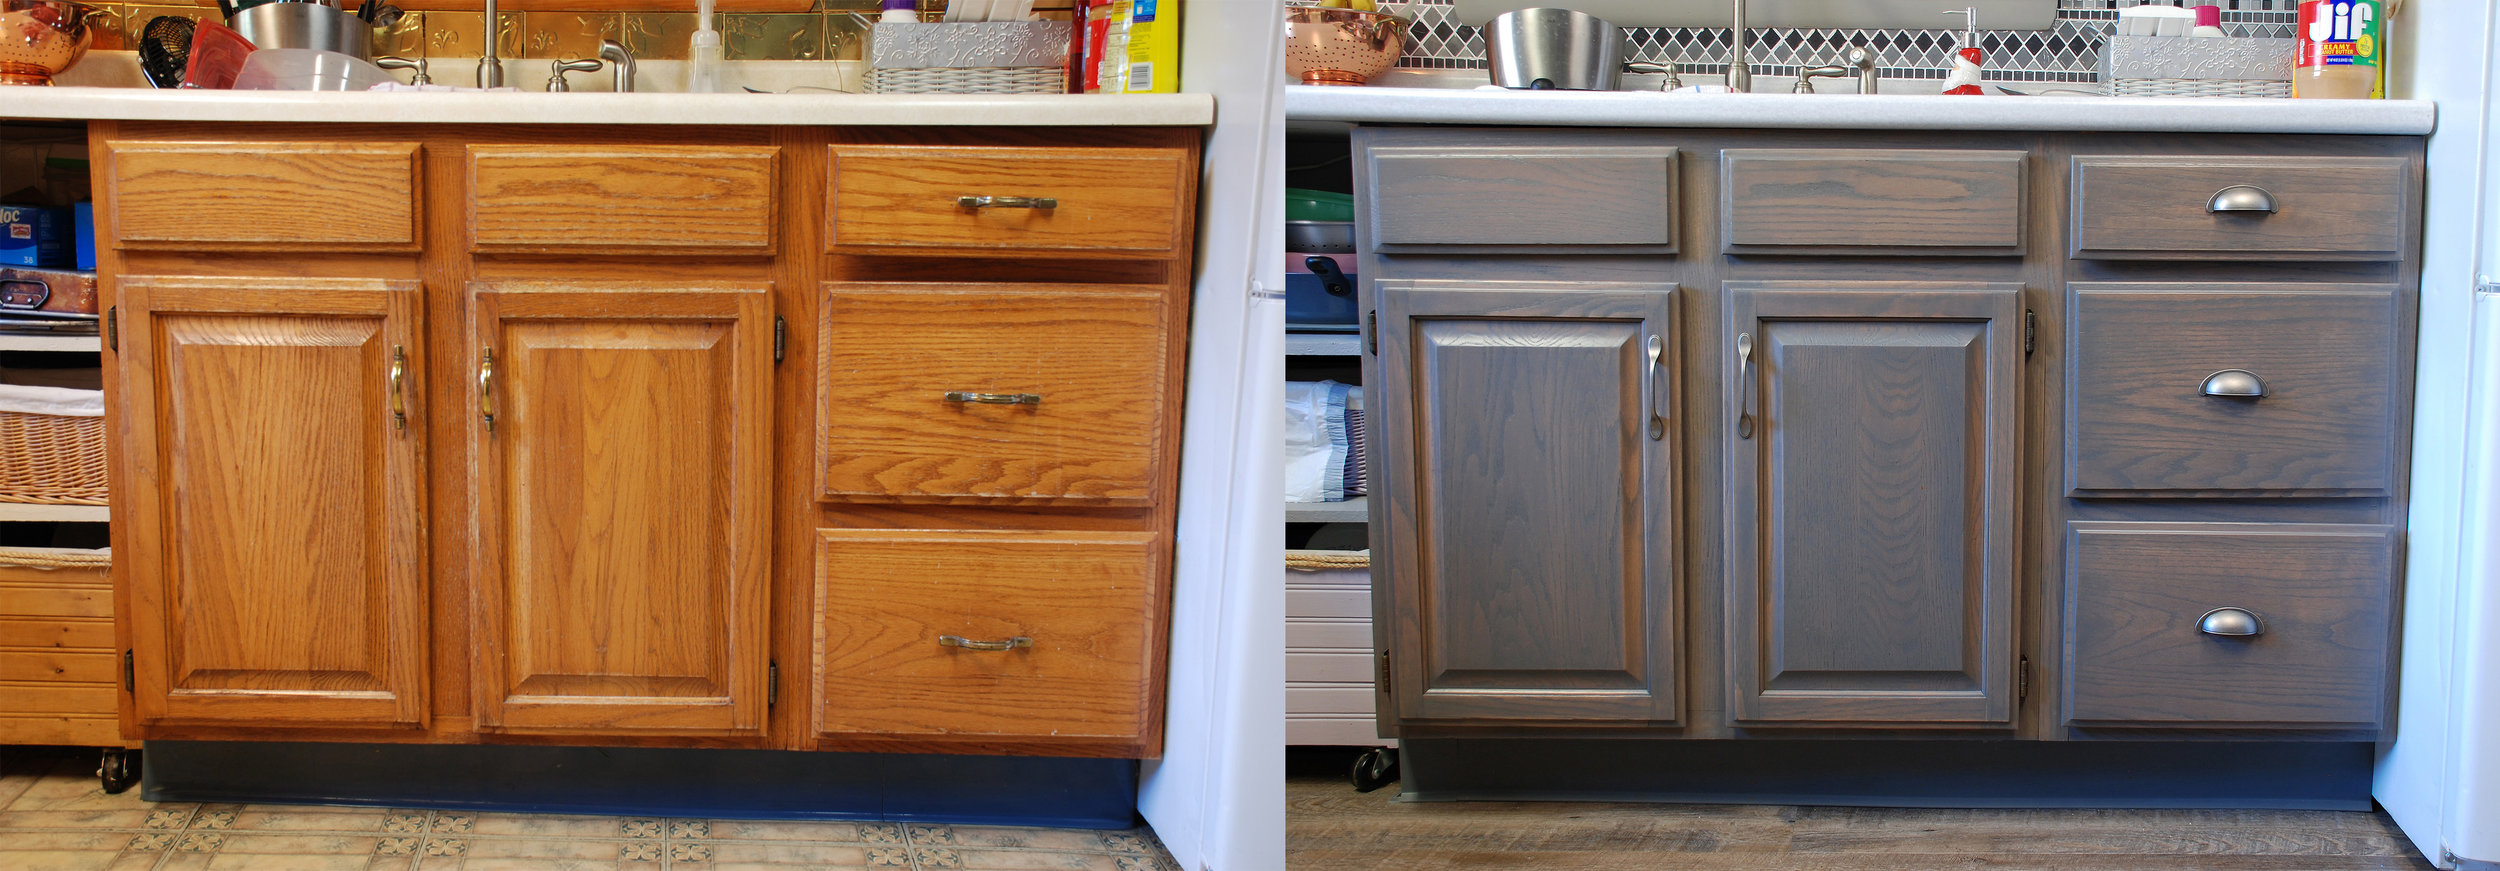 Refinished Lower Kitchen Cabinets.jpg